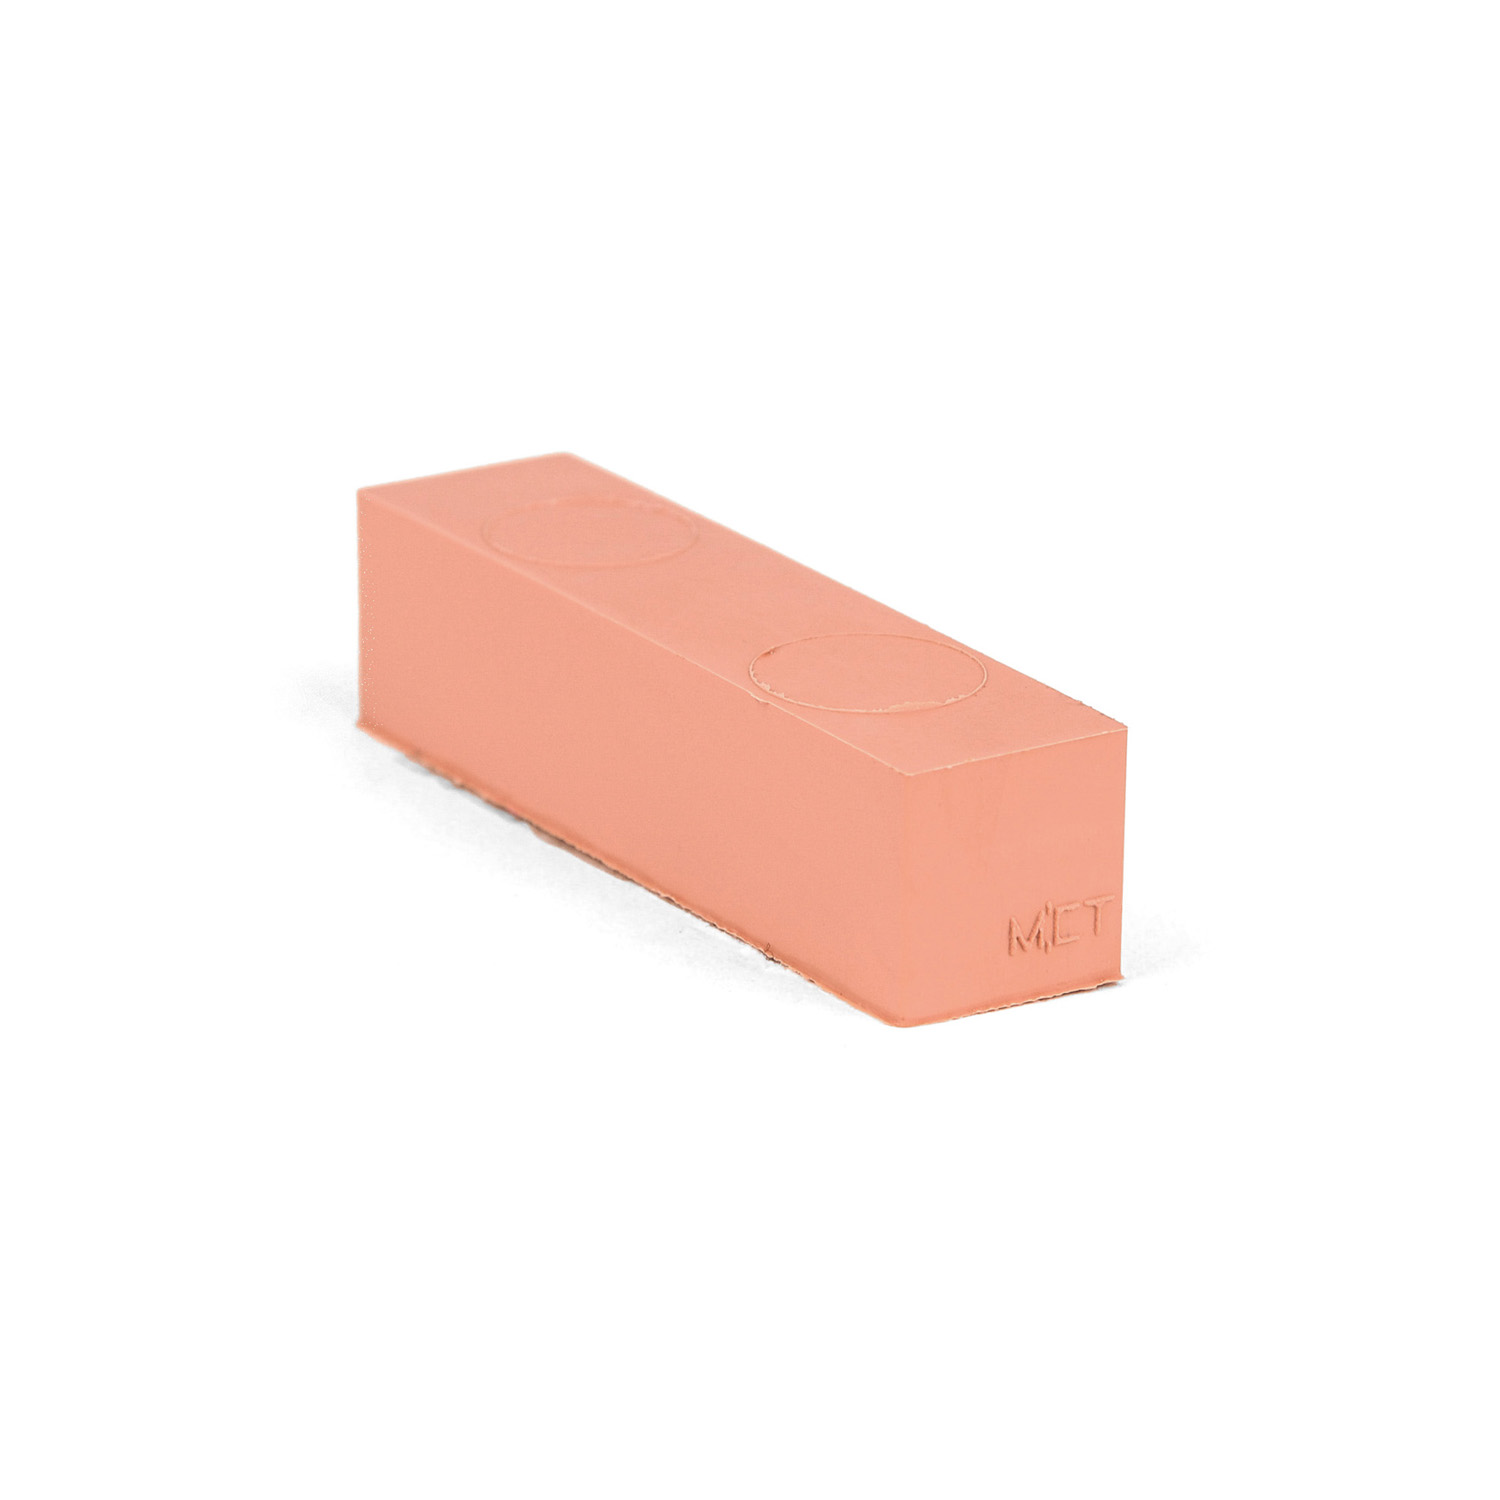 15-0 Spare block lycron, 15-0 solid block size 15x15mm